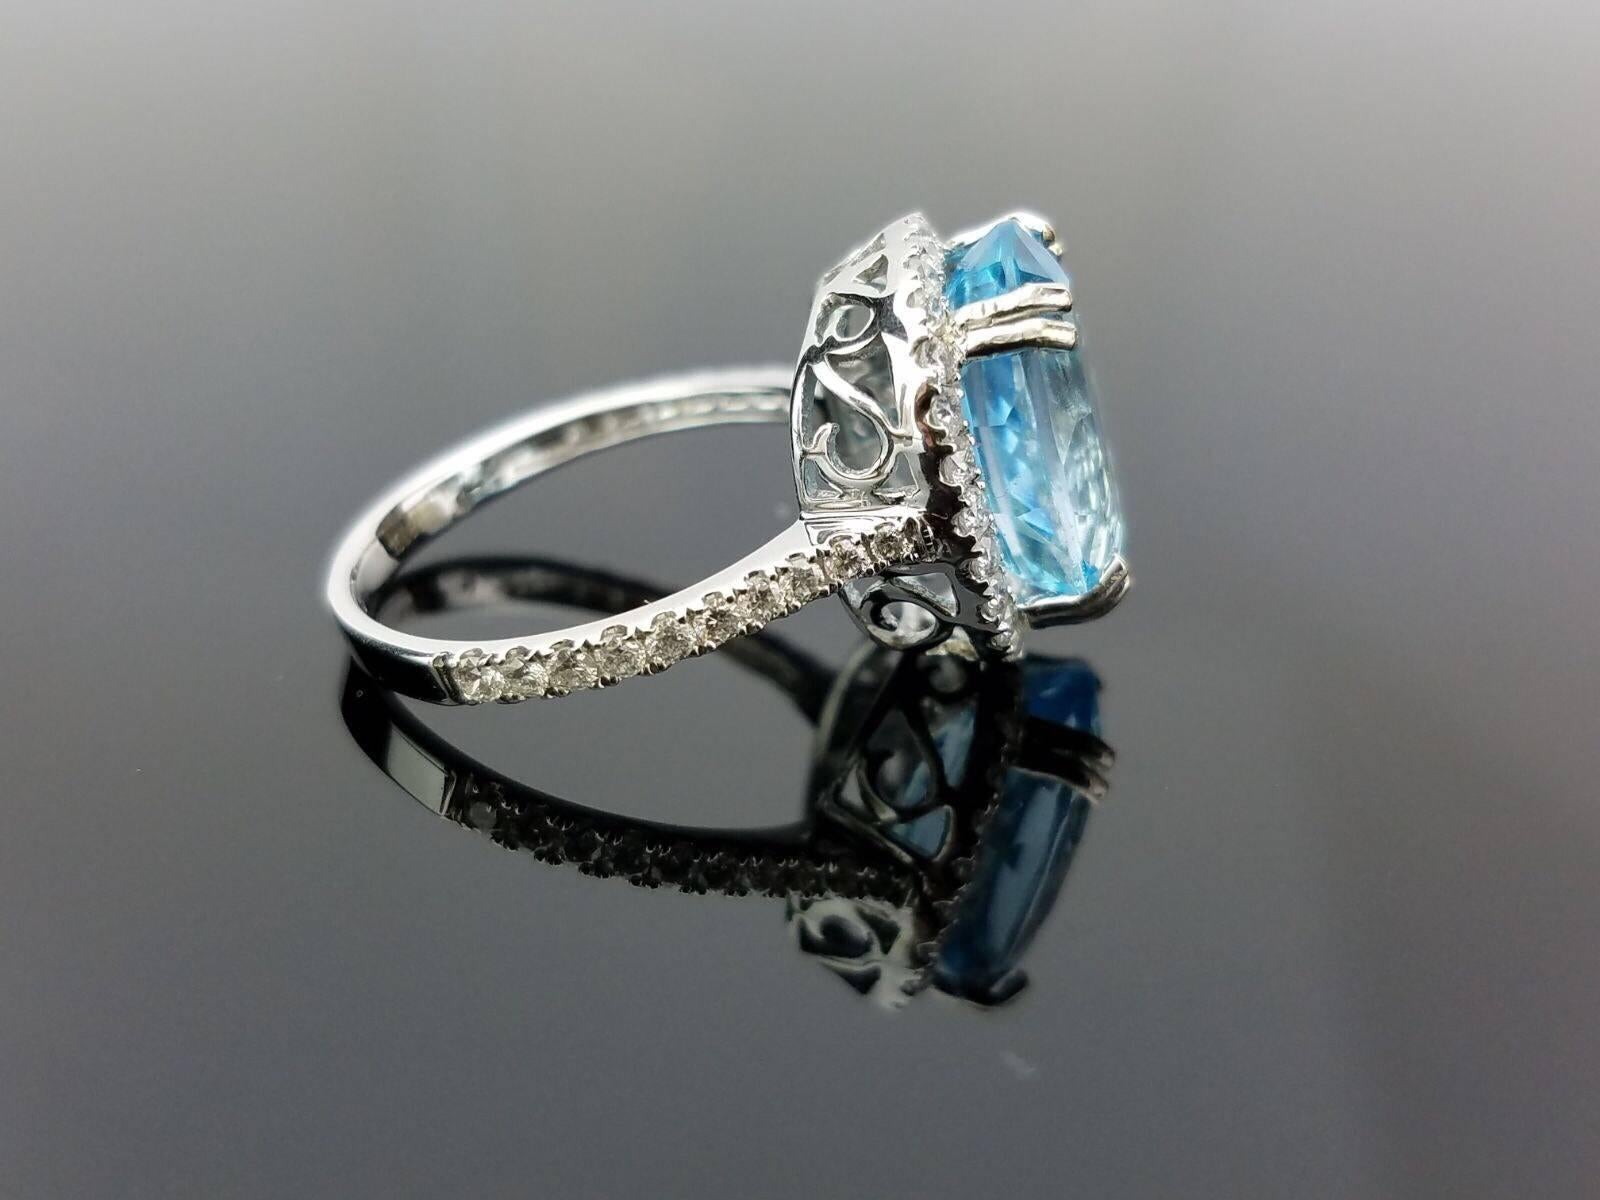 Beautiful Blue Topaz with a Diamond halo set on 18K White Gold band

Centre Stone Details:  
Stone: Blue Topaz
Cut: Oval
Weight: 6.28 carat

Diamond Details:
Cut: Brilliant (round) 
Total Carat Weight: 0.64 carat 
Quality: VS/SI , H/I 

18K Gold: